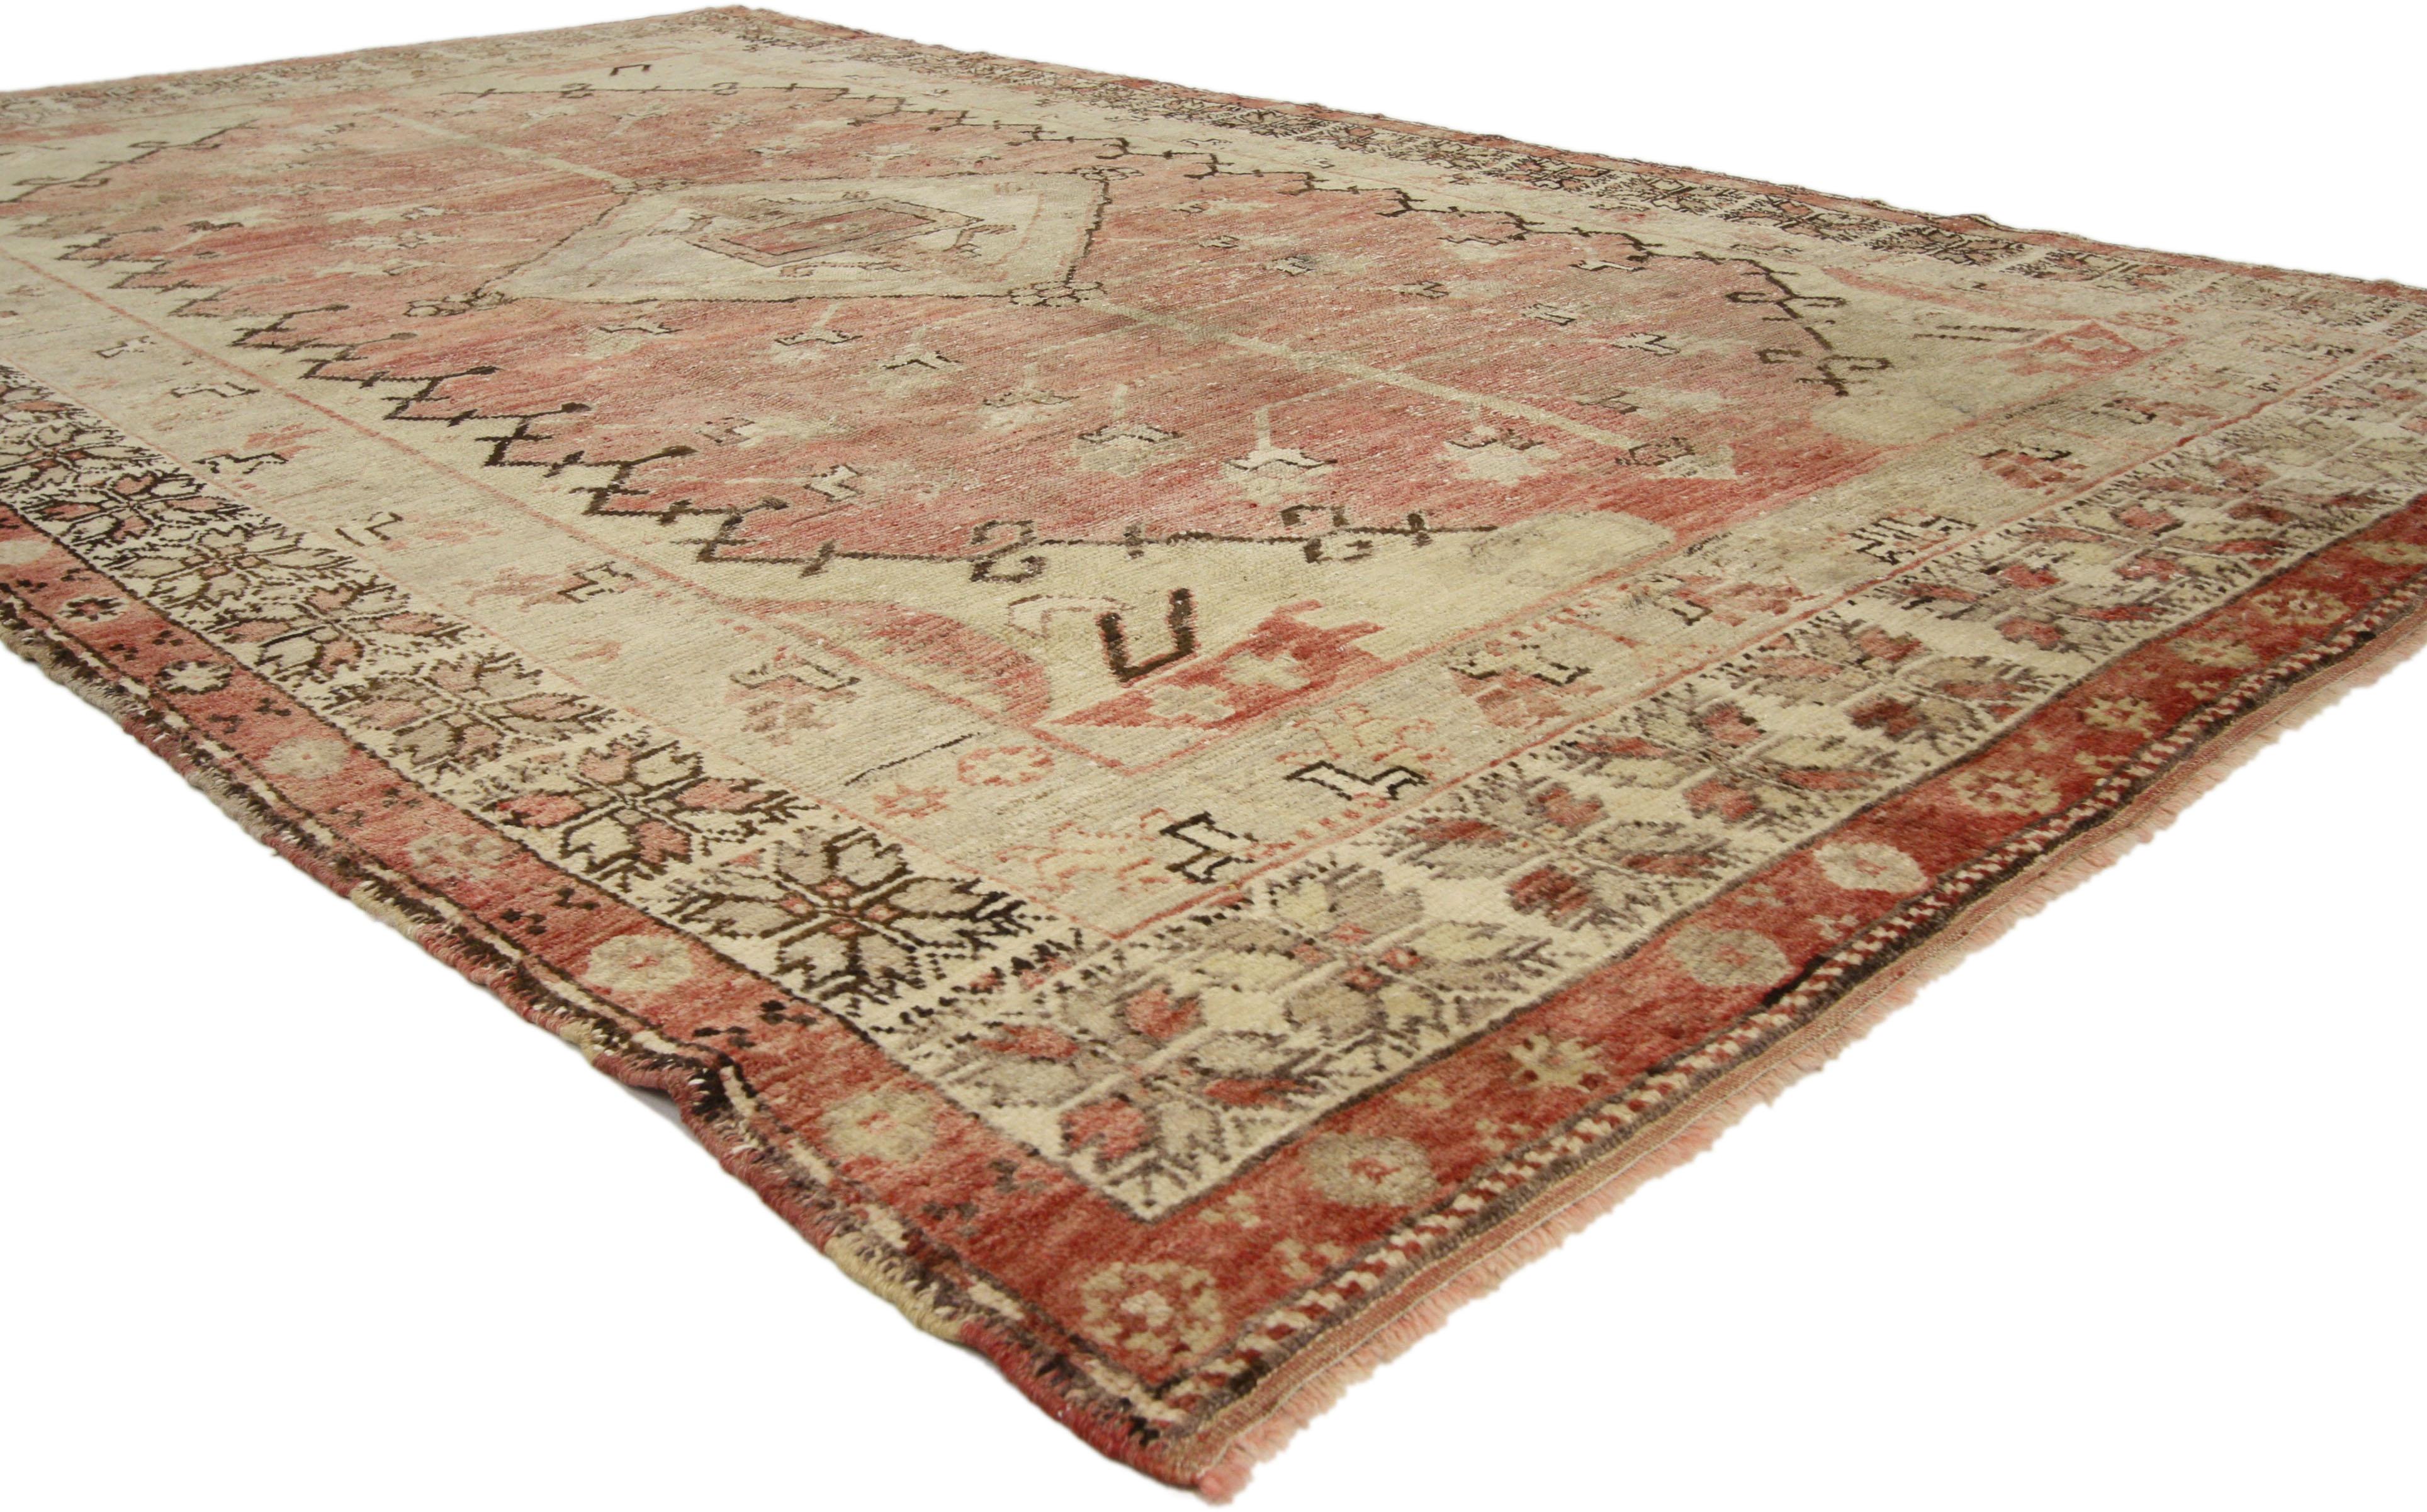 73663, distressed vintage Turkish Oushak rug with rustic Adirondack lodge style. This hand knotted wool distressed vintage Turkish Oushak rug features a pole medallion with tree of life expensions and a central lozenge motif patterned with rosettes